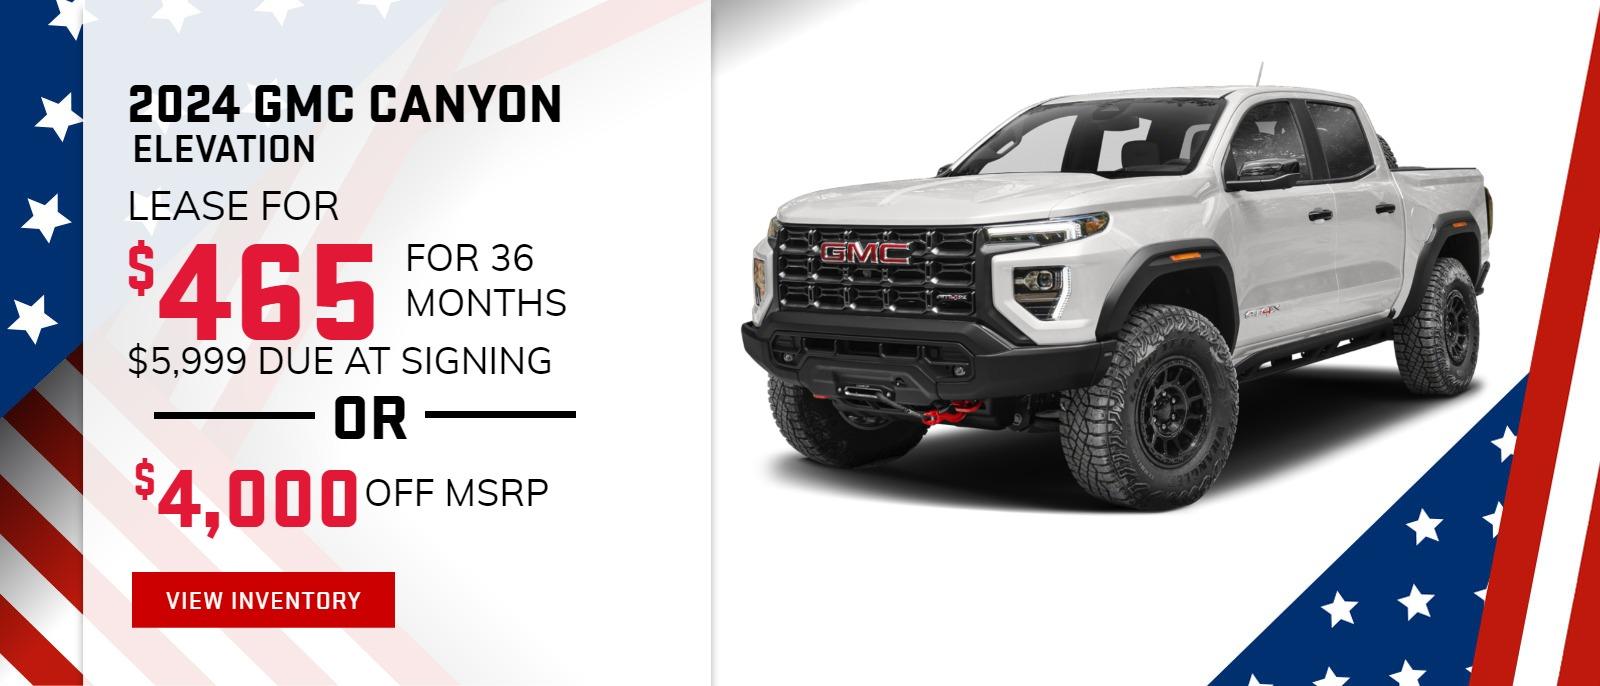 2024 GMC CANYON ELEVATION
$465 Per Month / 36 Month Lease / $5999 due at signing
$4,000 OFF MSRP